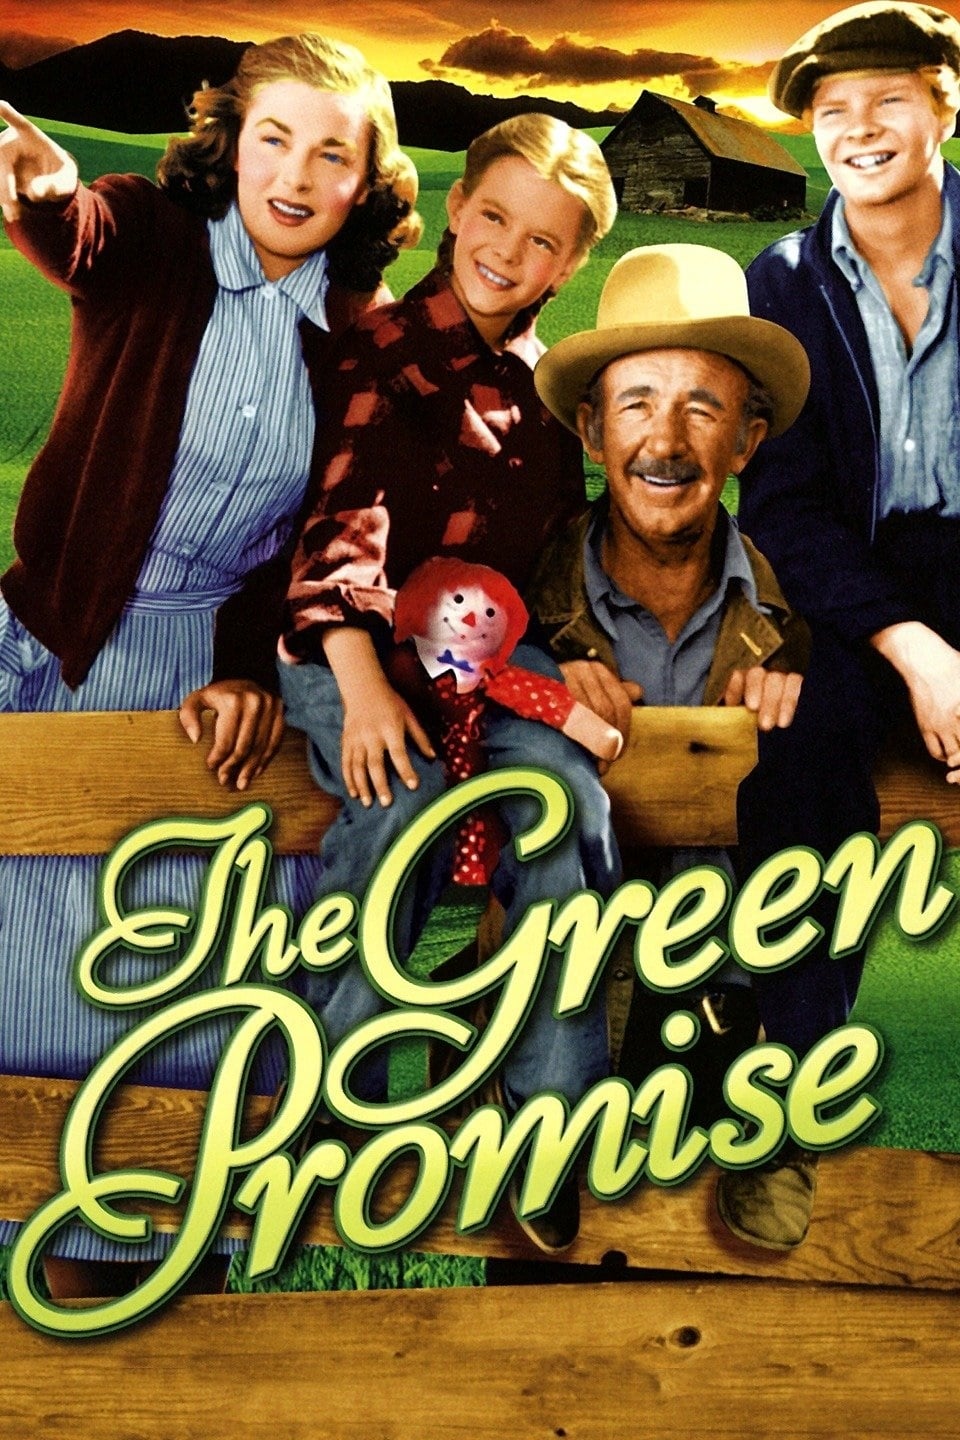 The Green Promise (1949)